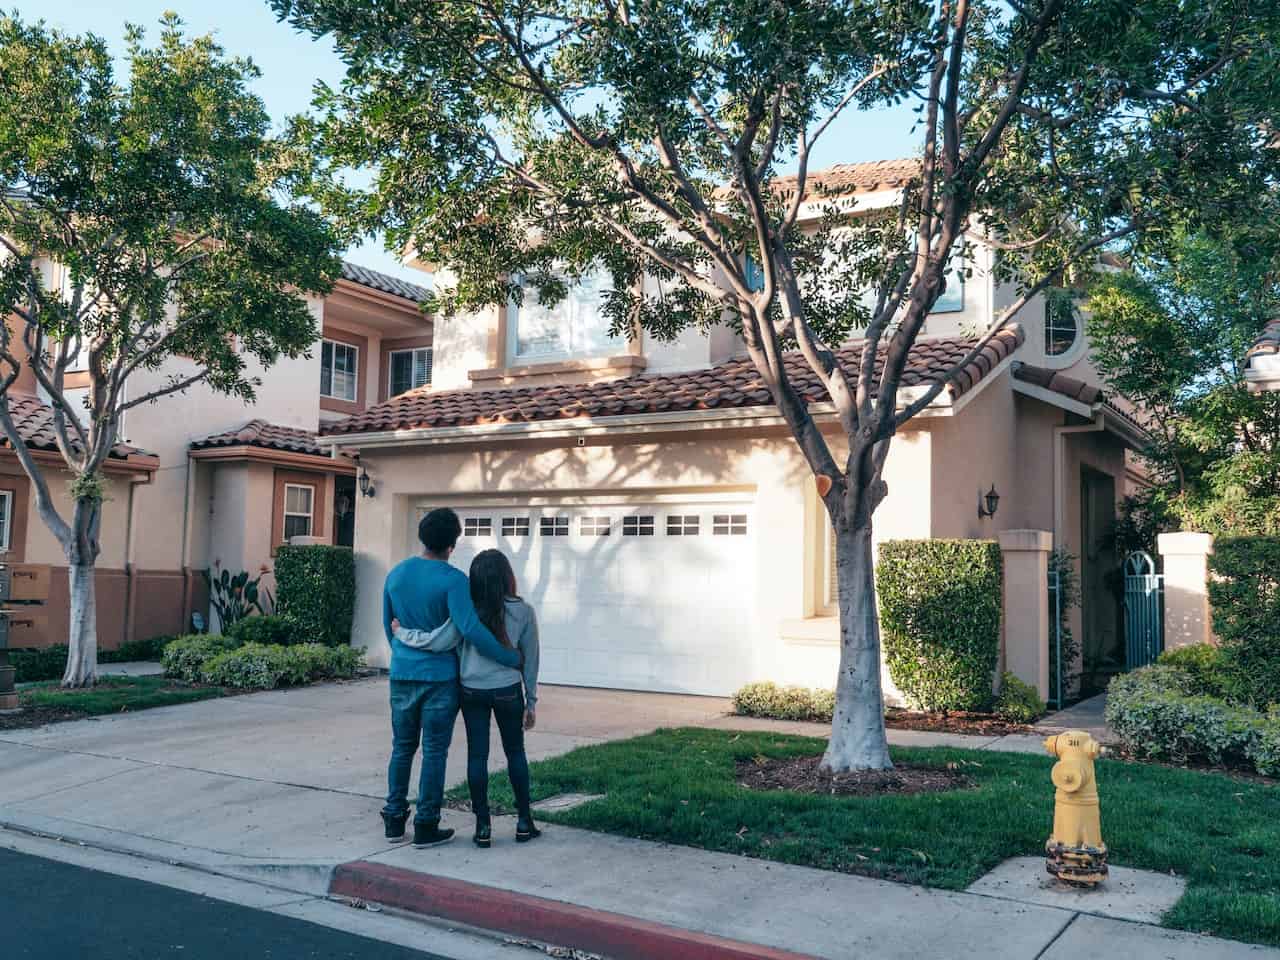 Couple in front of a stucco house on a sidewalk